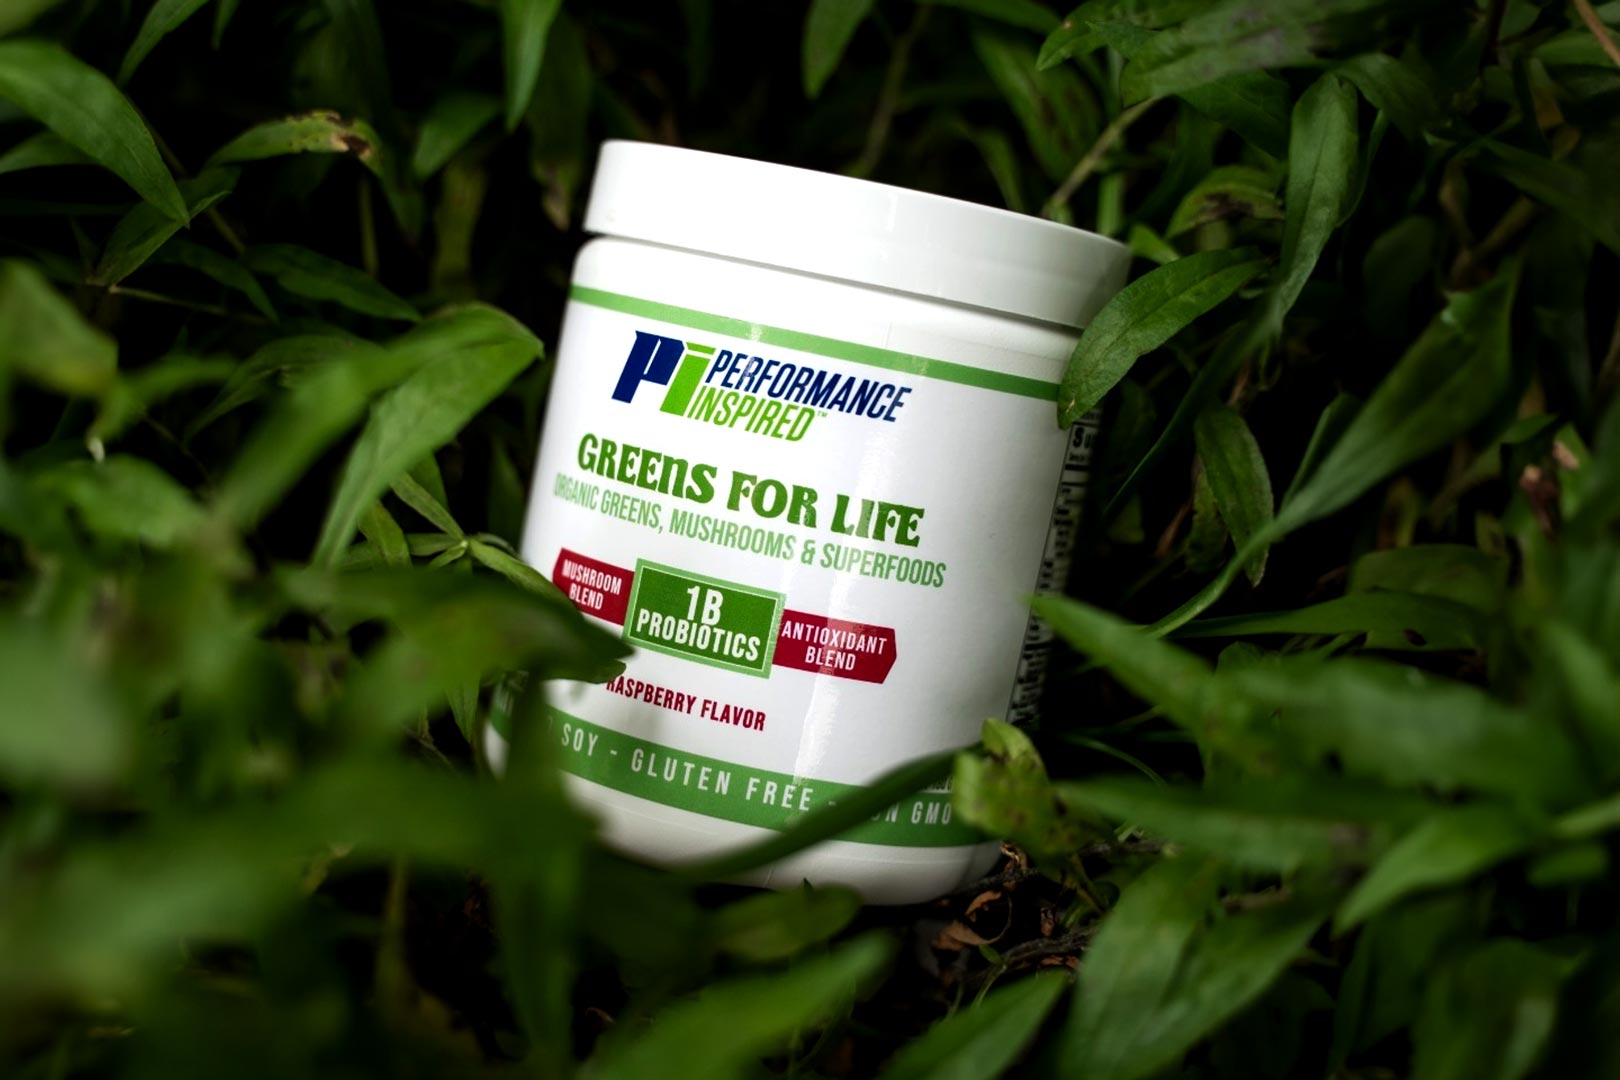 Performance Inspired Greens For Life